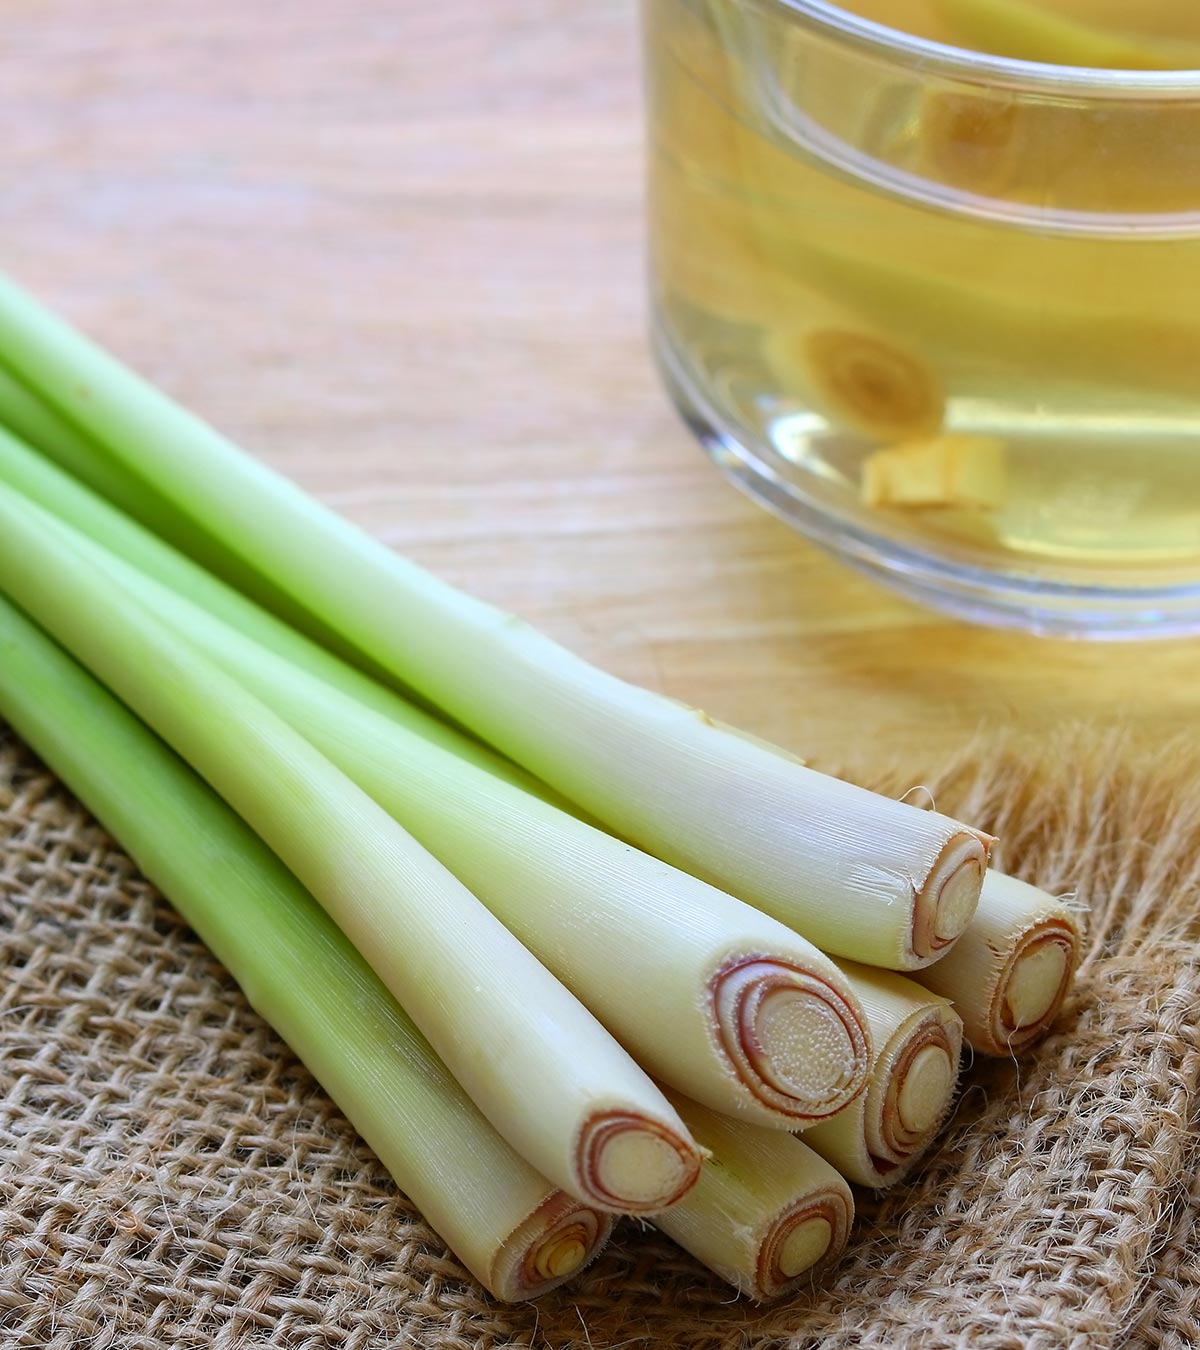 How Safe Is Lemongrass During Pregnancy